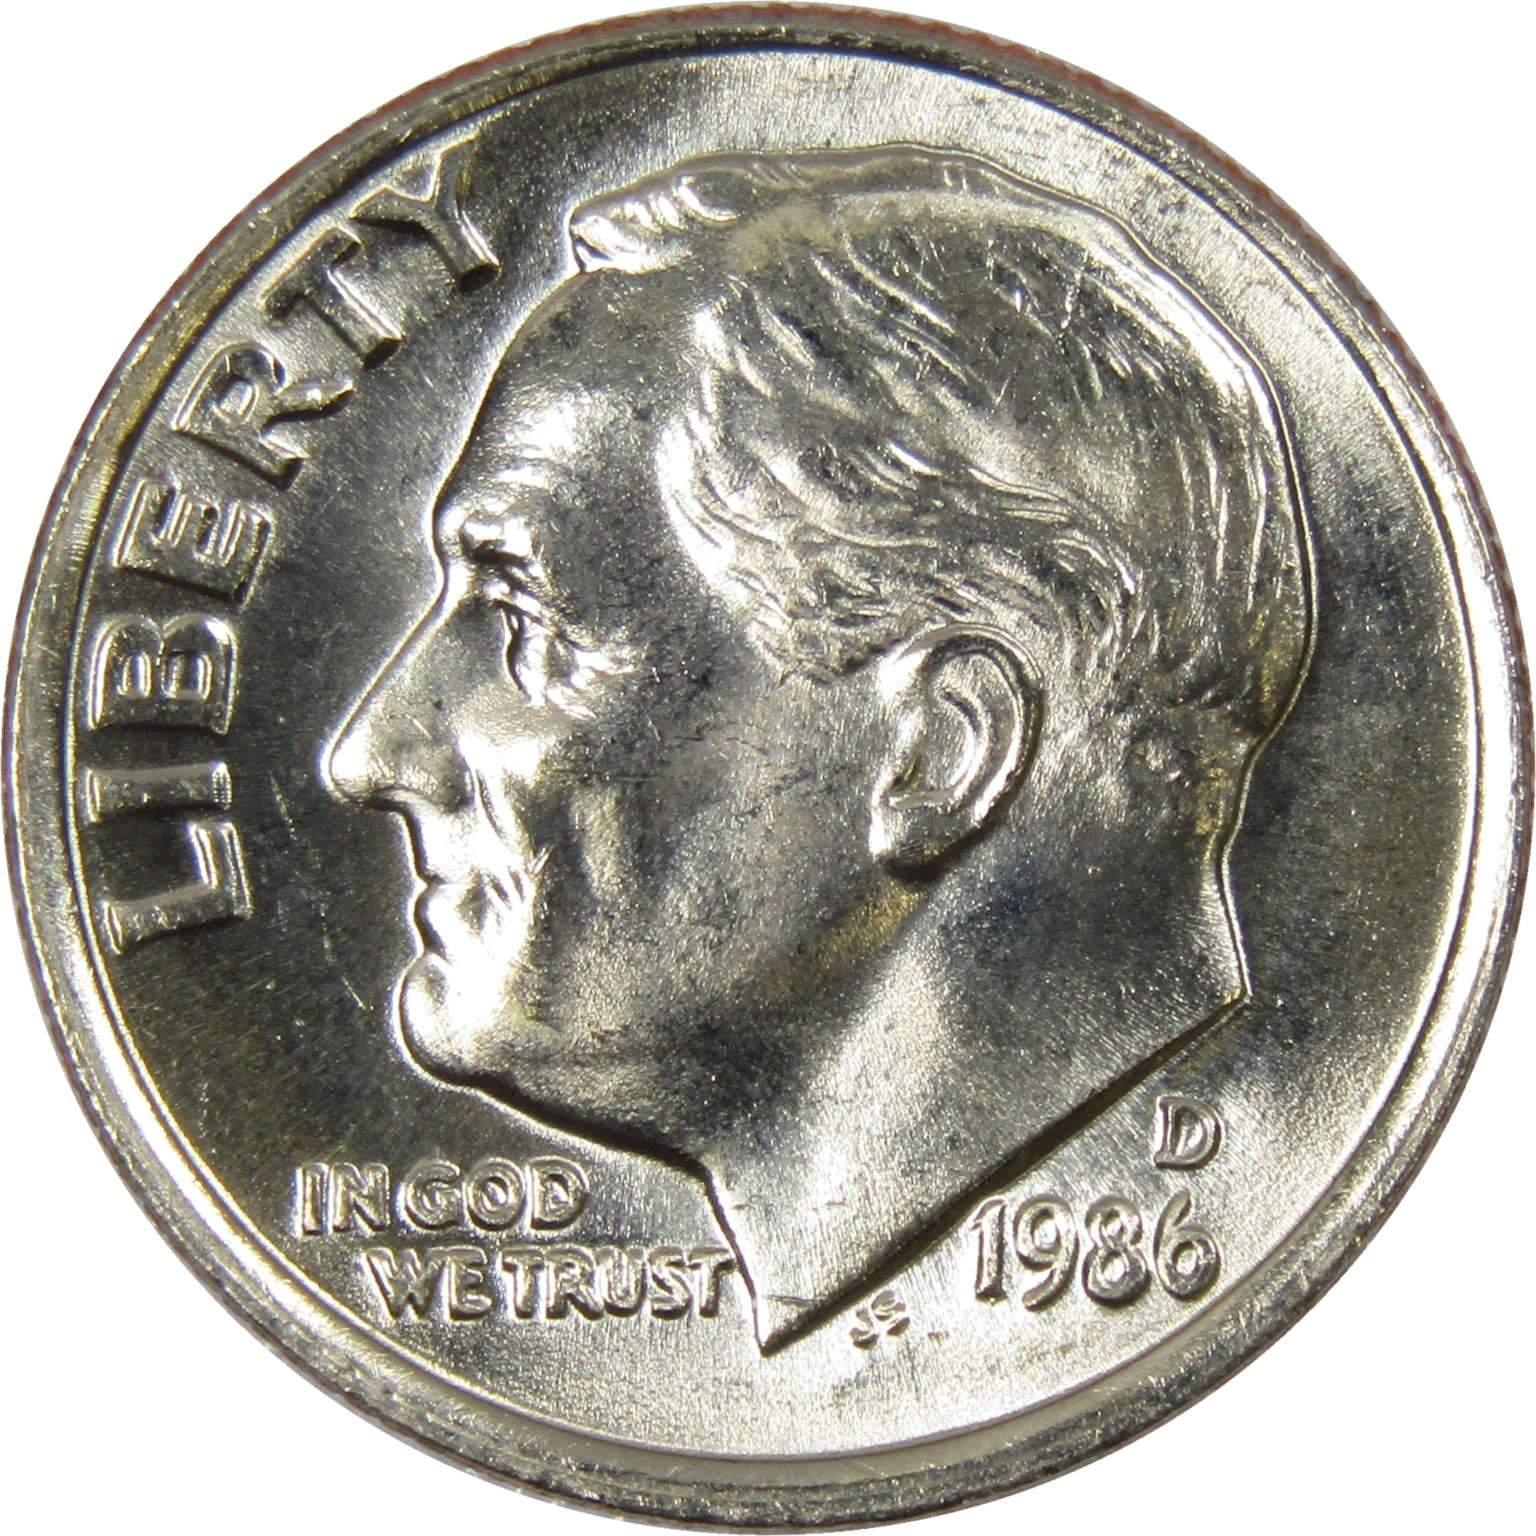 1986 D Roosevelt Dime BU Uncirculated Mint State 10c US Coin Collectible